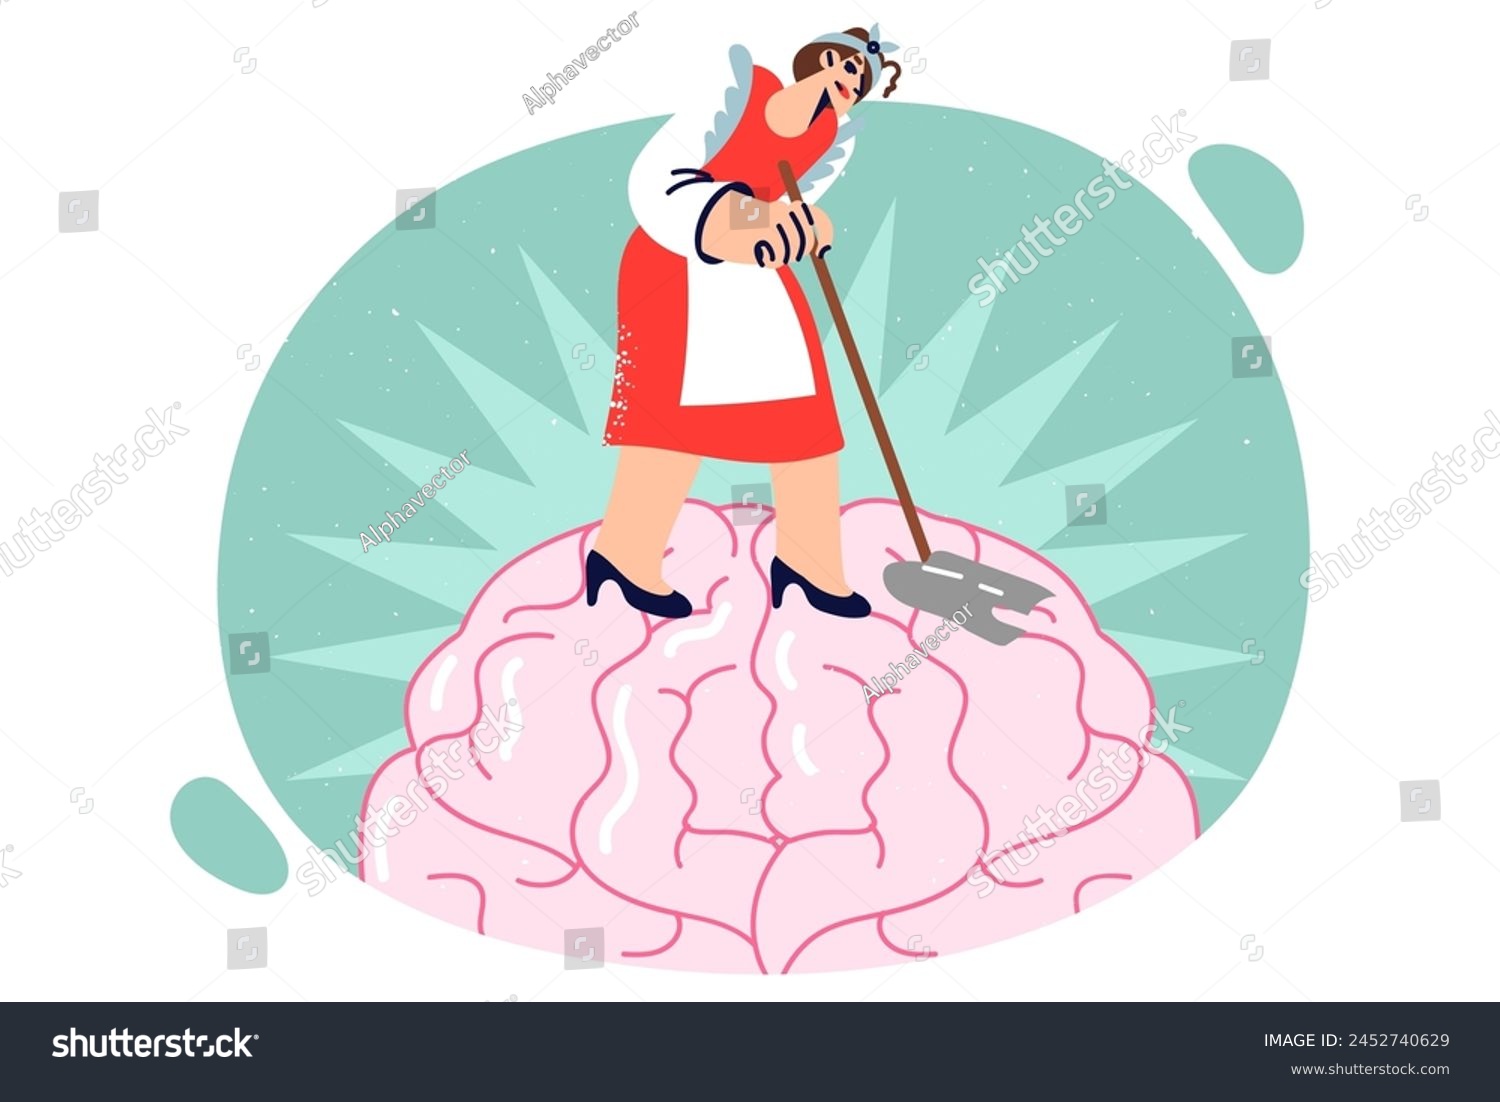 SVG of Maid washes brain with mop, getting rid of bad thoughts, concept mental and psychological hygiene. Metaphor of meditations for detoxification and therapy with psychotherapist to help cleanse brain svg